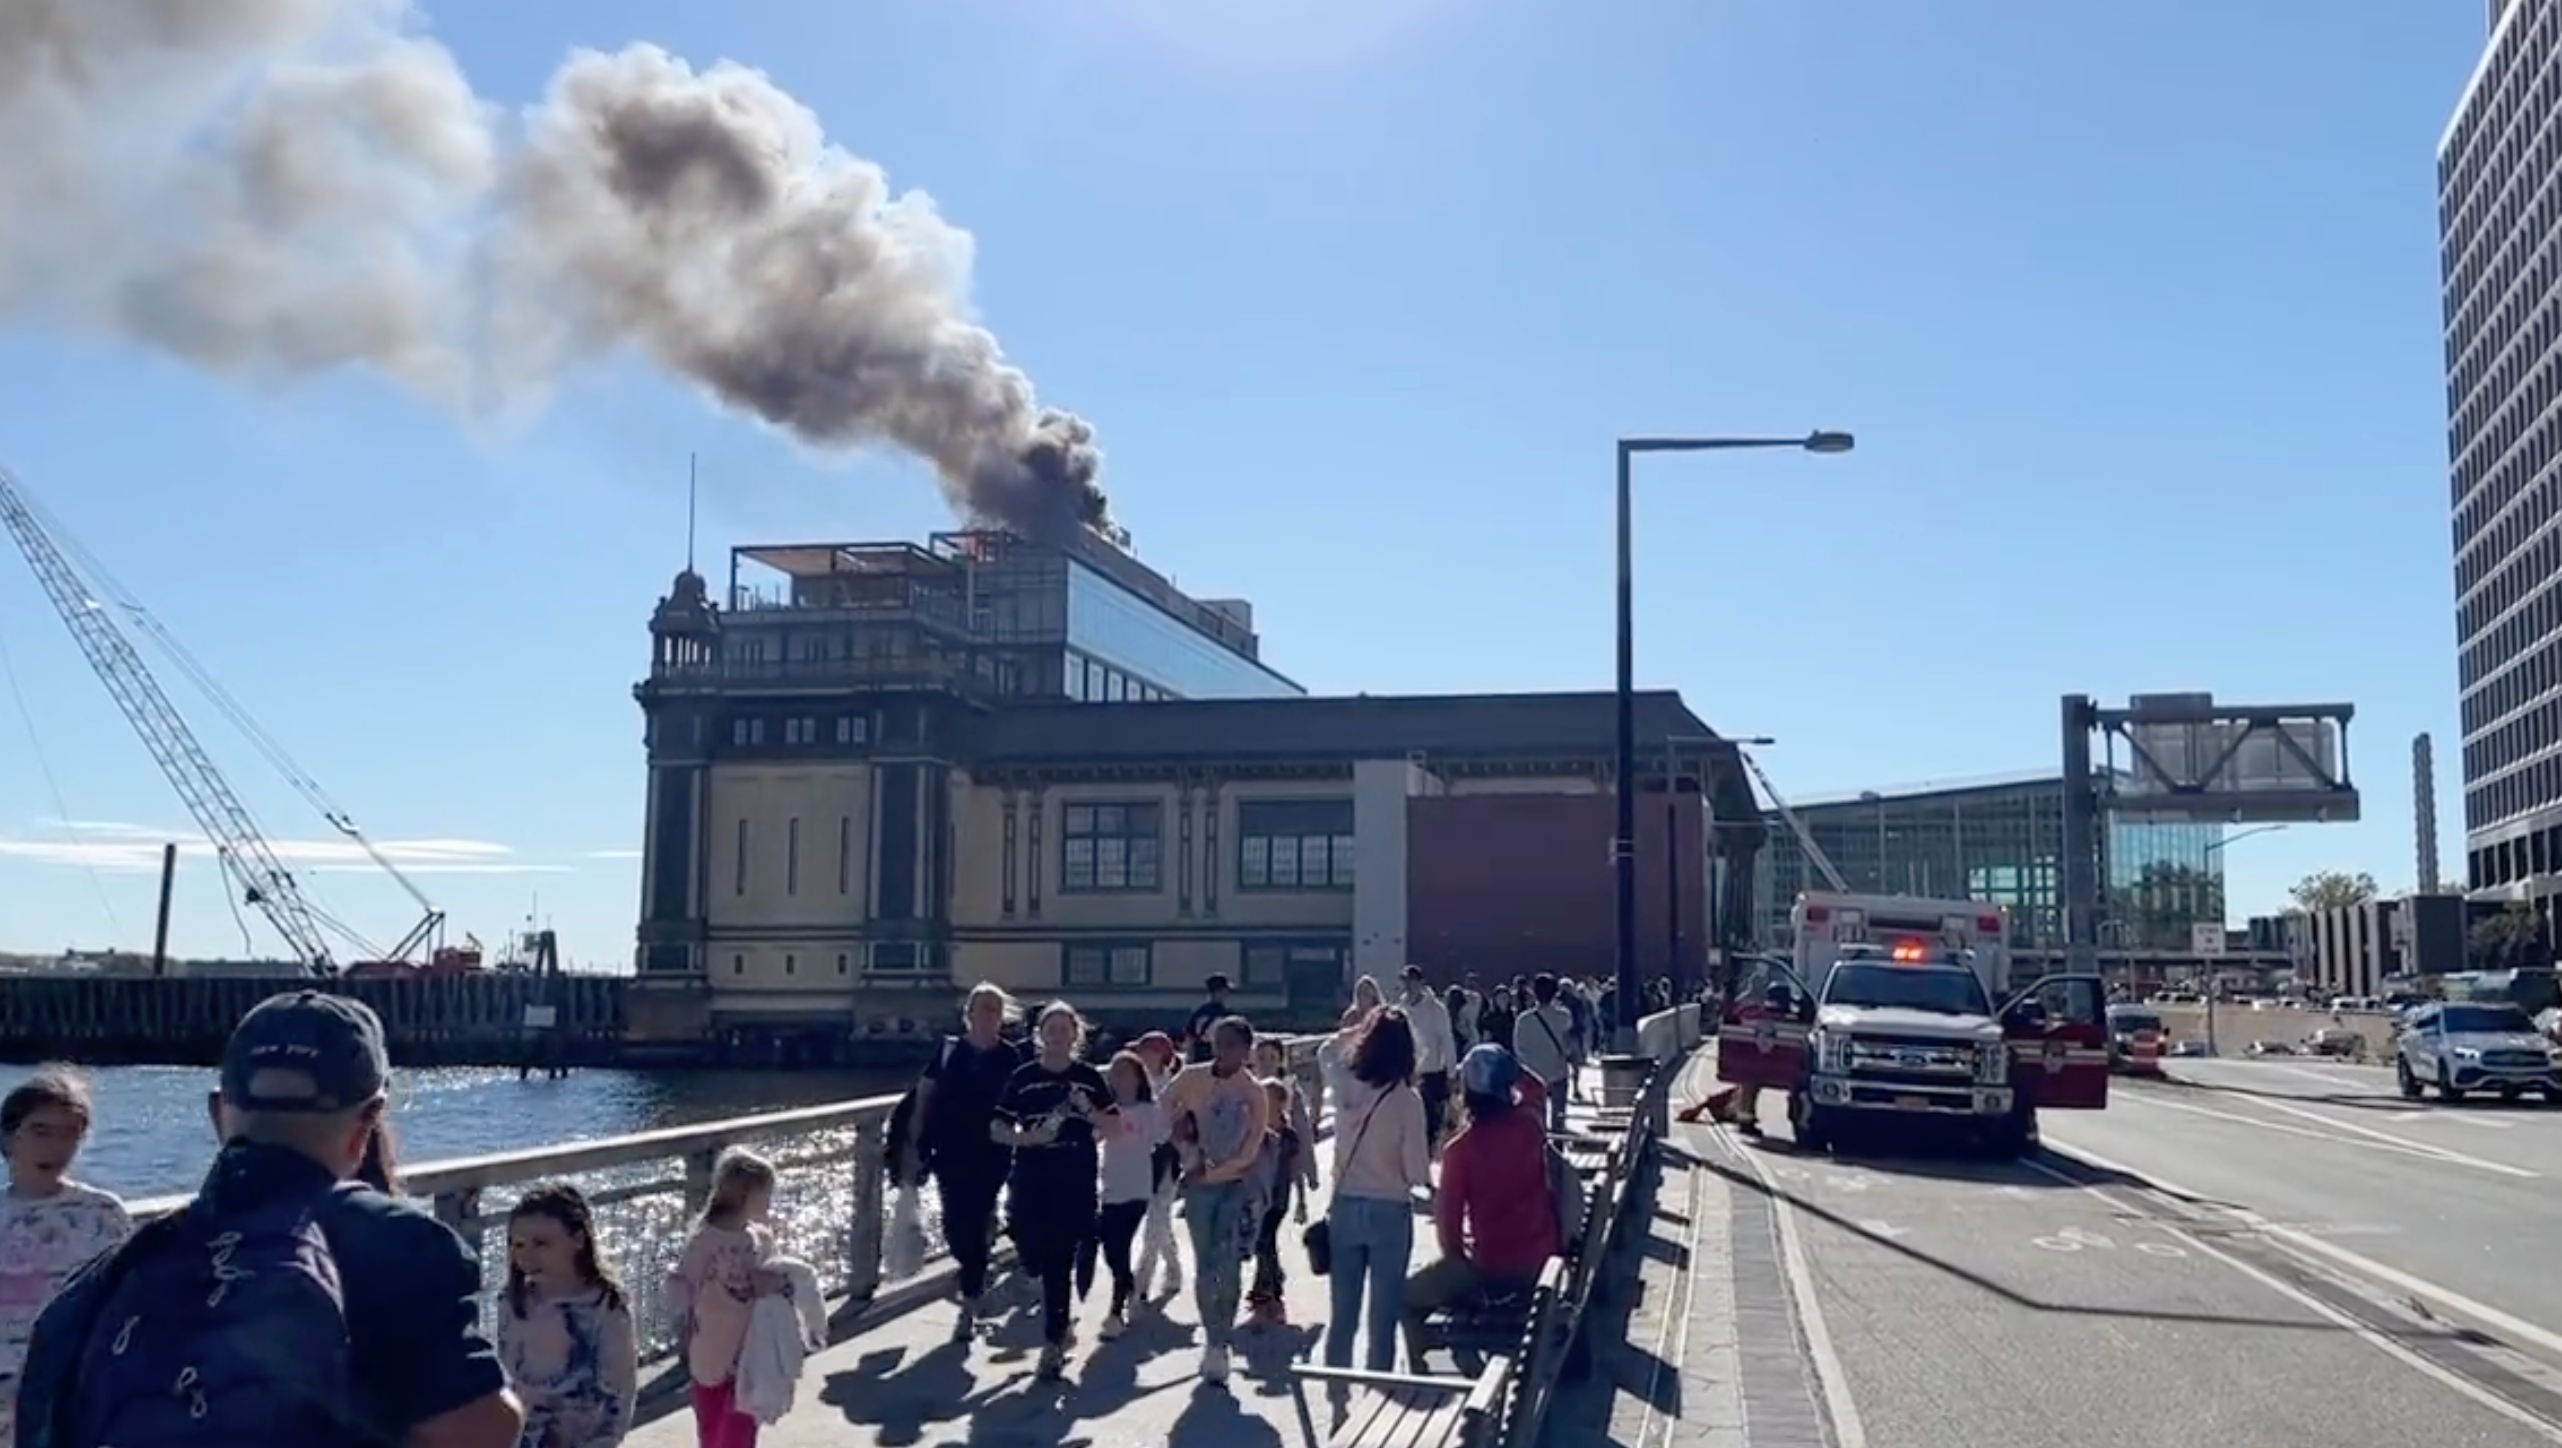 independent.co.uk - Alex Woodward - Exclusive New York restaurant evacuated after fire at historic ferry terminal